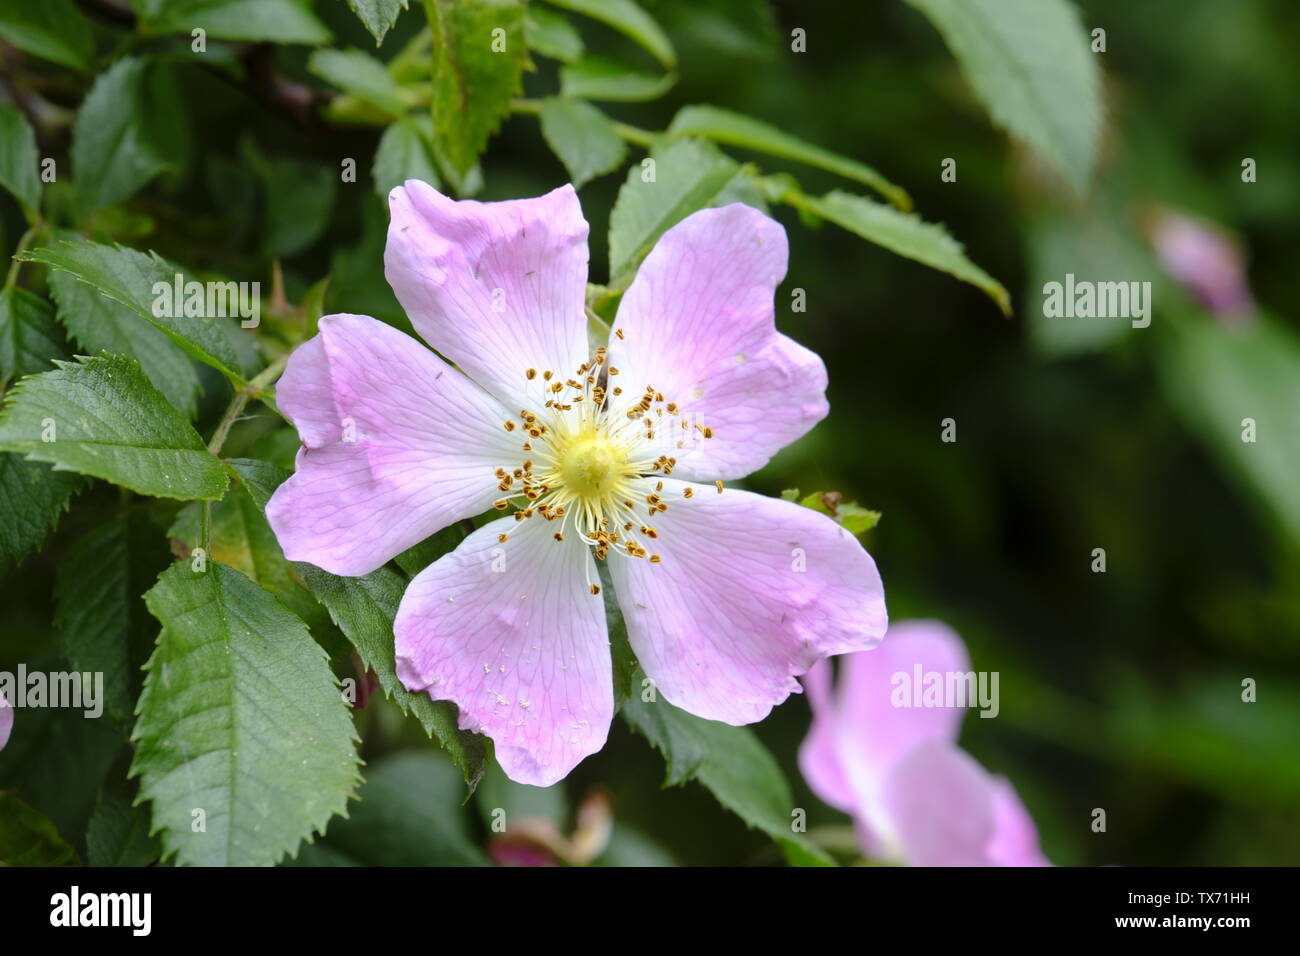 West Sussex, UK. Dog Rose (Rosa canina) in bloom in woodland in early summer Stock Photo